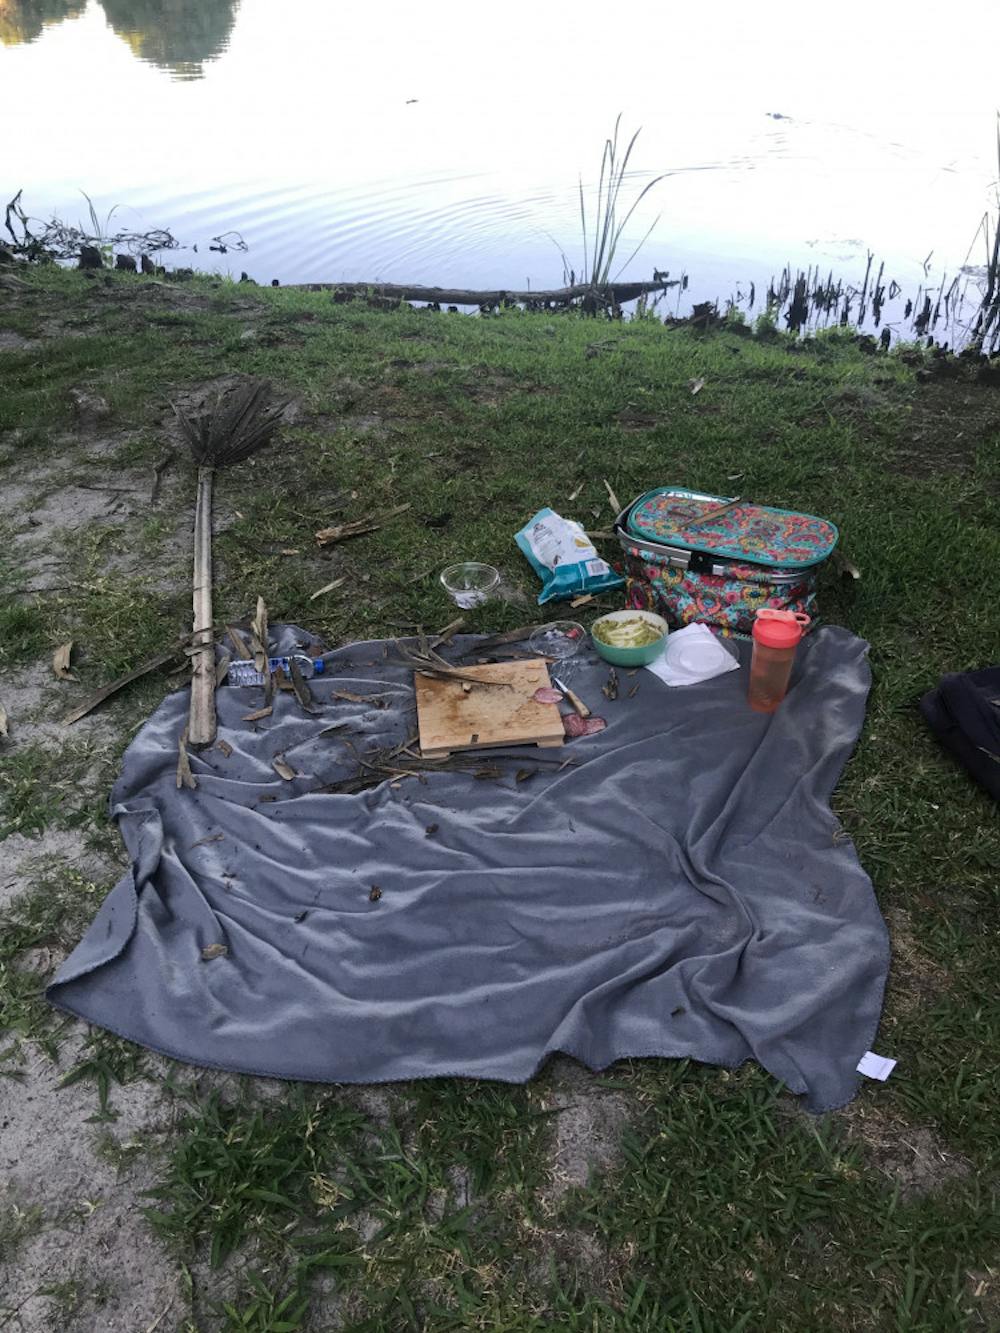 <p>Taylor Forte, a 21-year-old UF civil engineering senior, prepared a picnic with her fiancé, Trevor Walters, last Thursday evening. After about 30 minutes, an alligator came out of Lake Alice and consumed their entire set up</p>